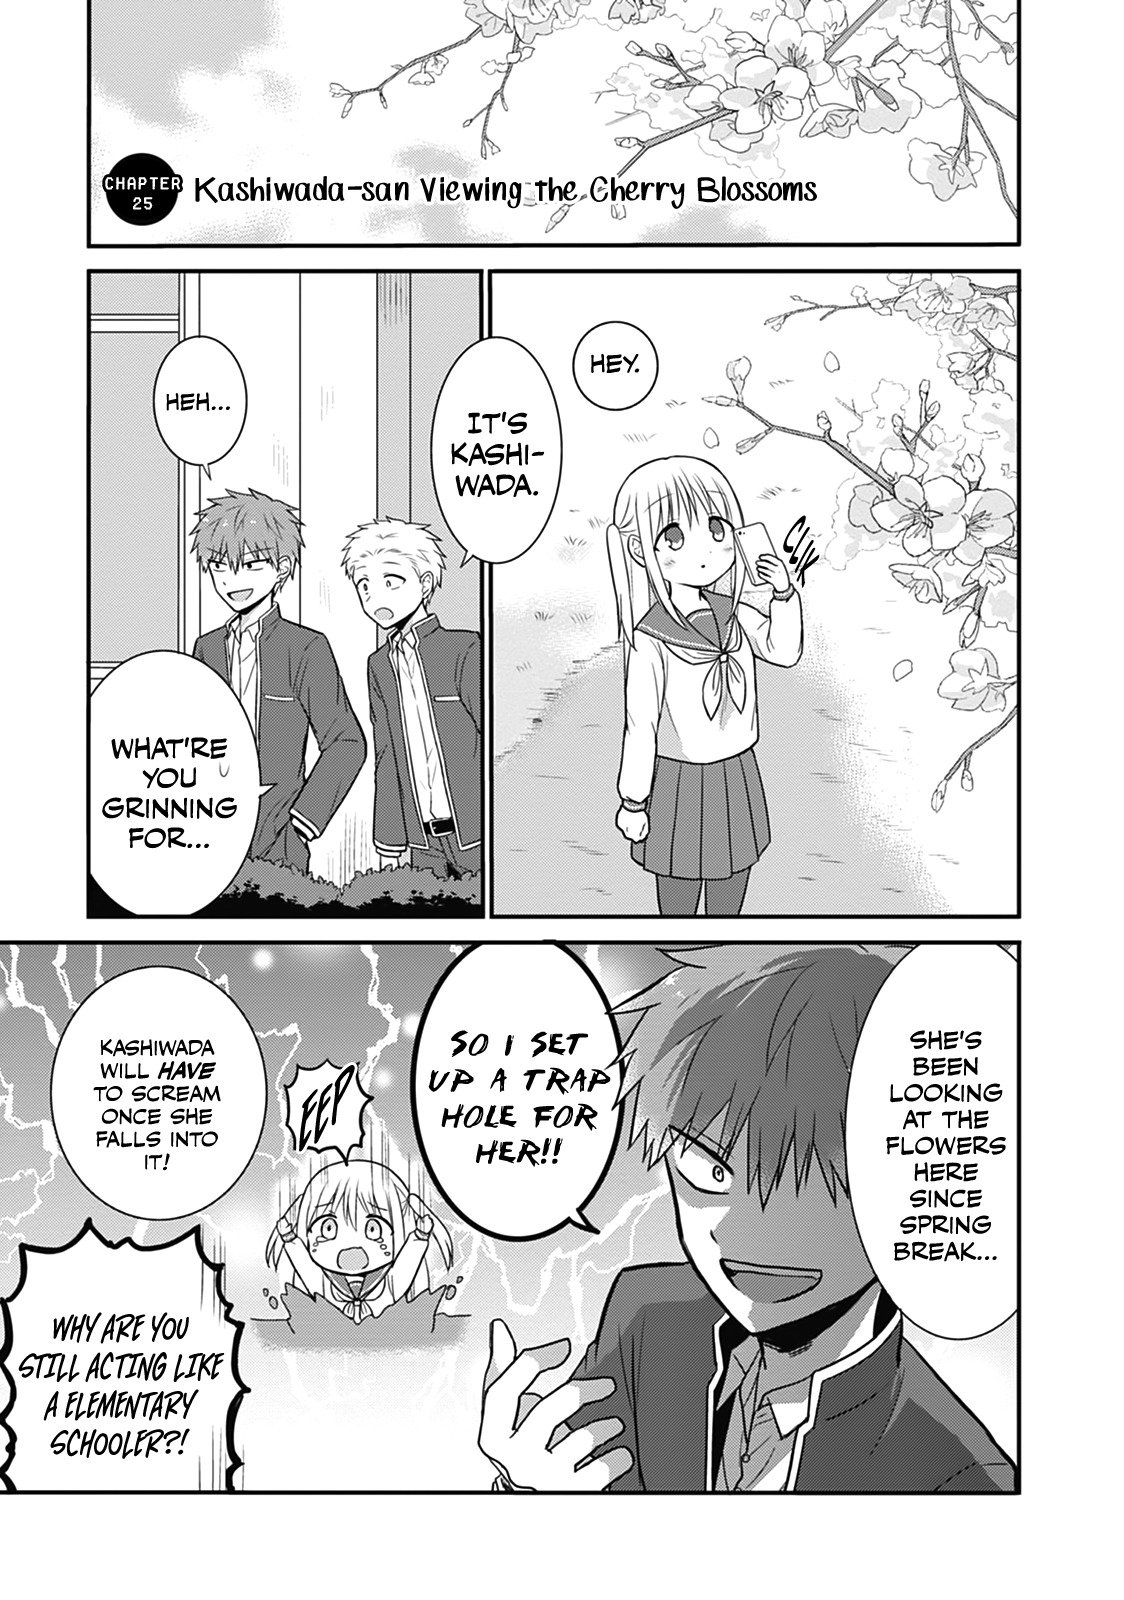 Expressionless Face Girl and Emotional Face Boy vol.2 ch.25